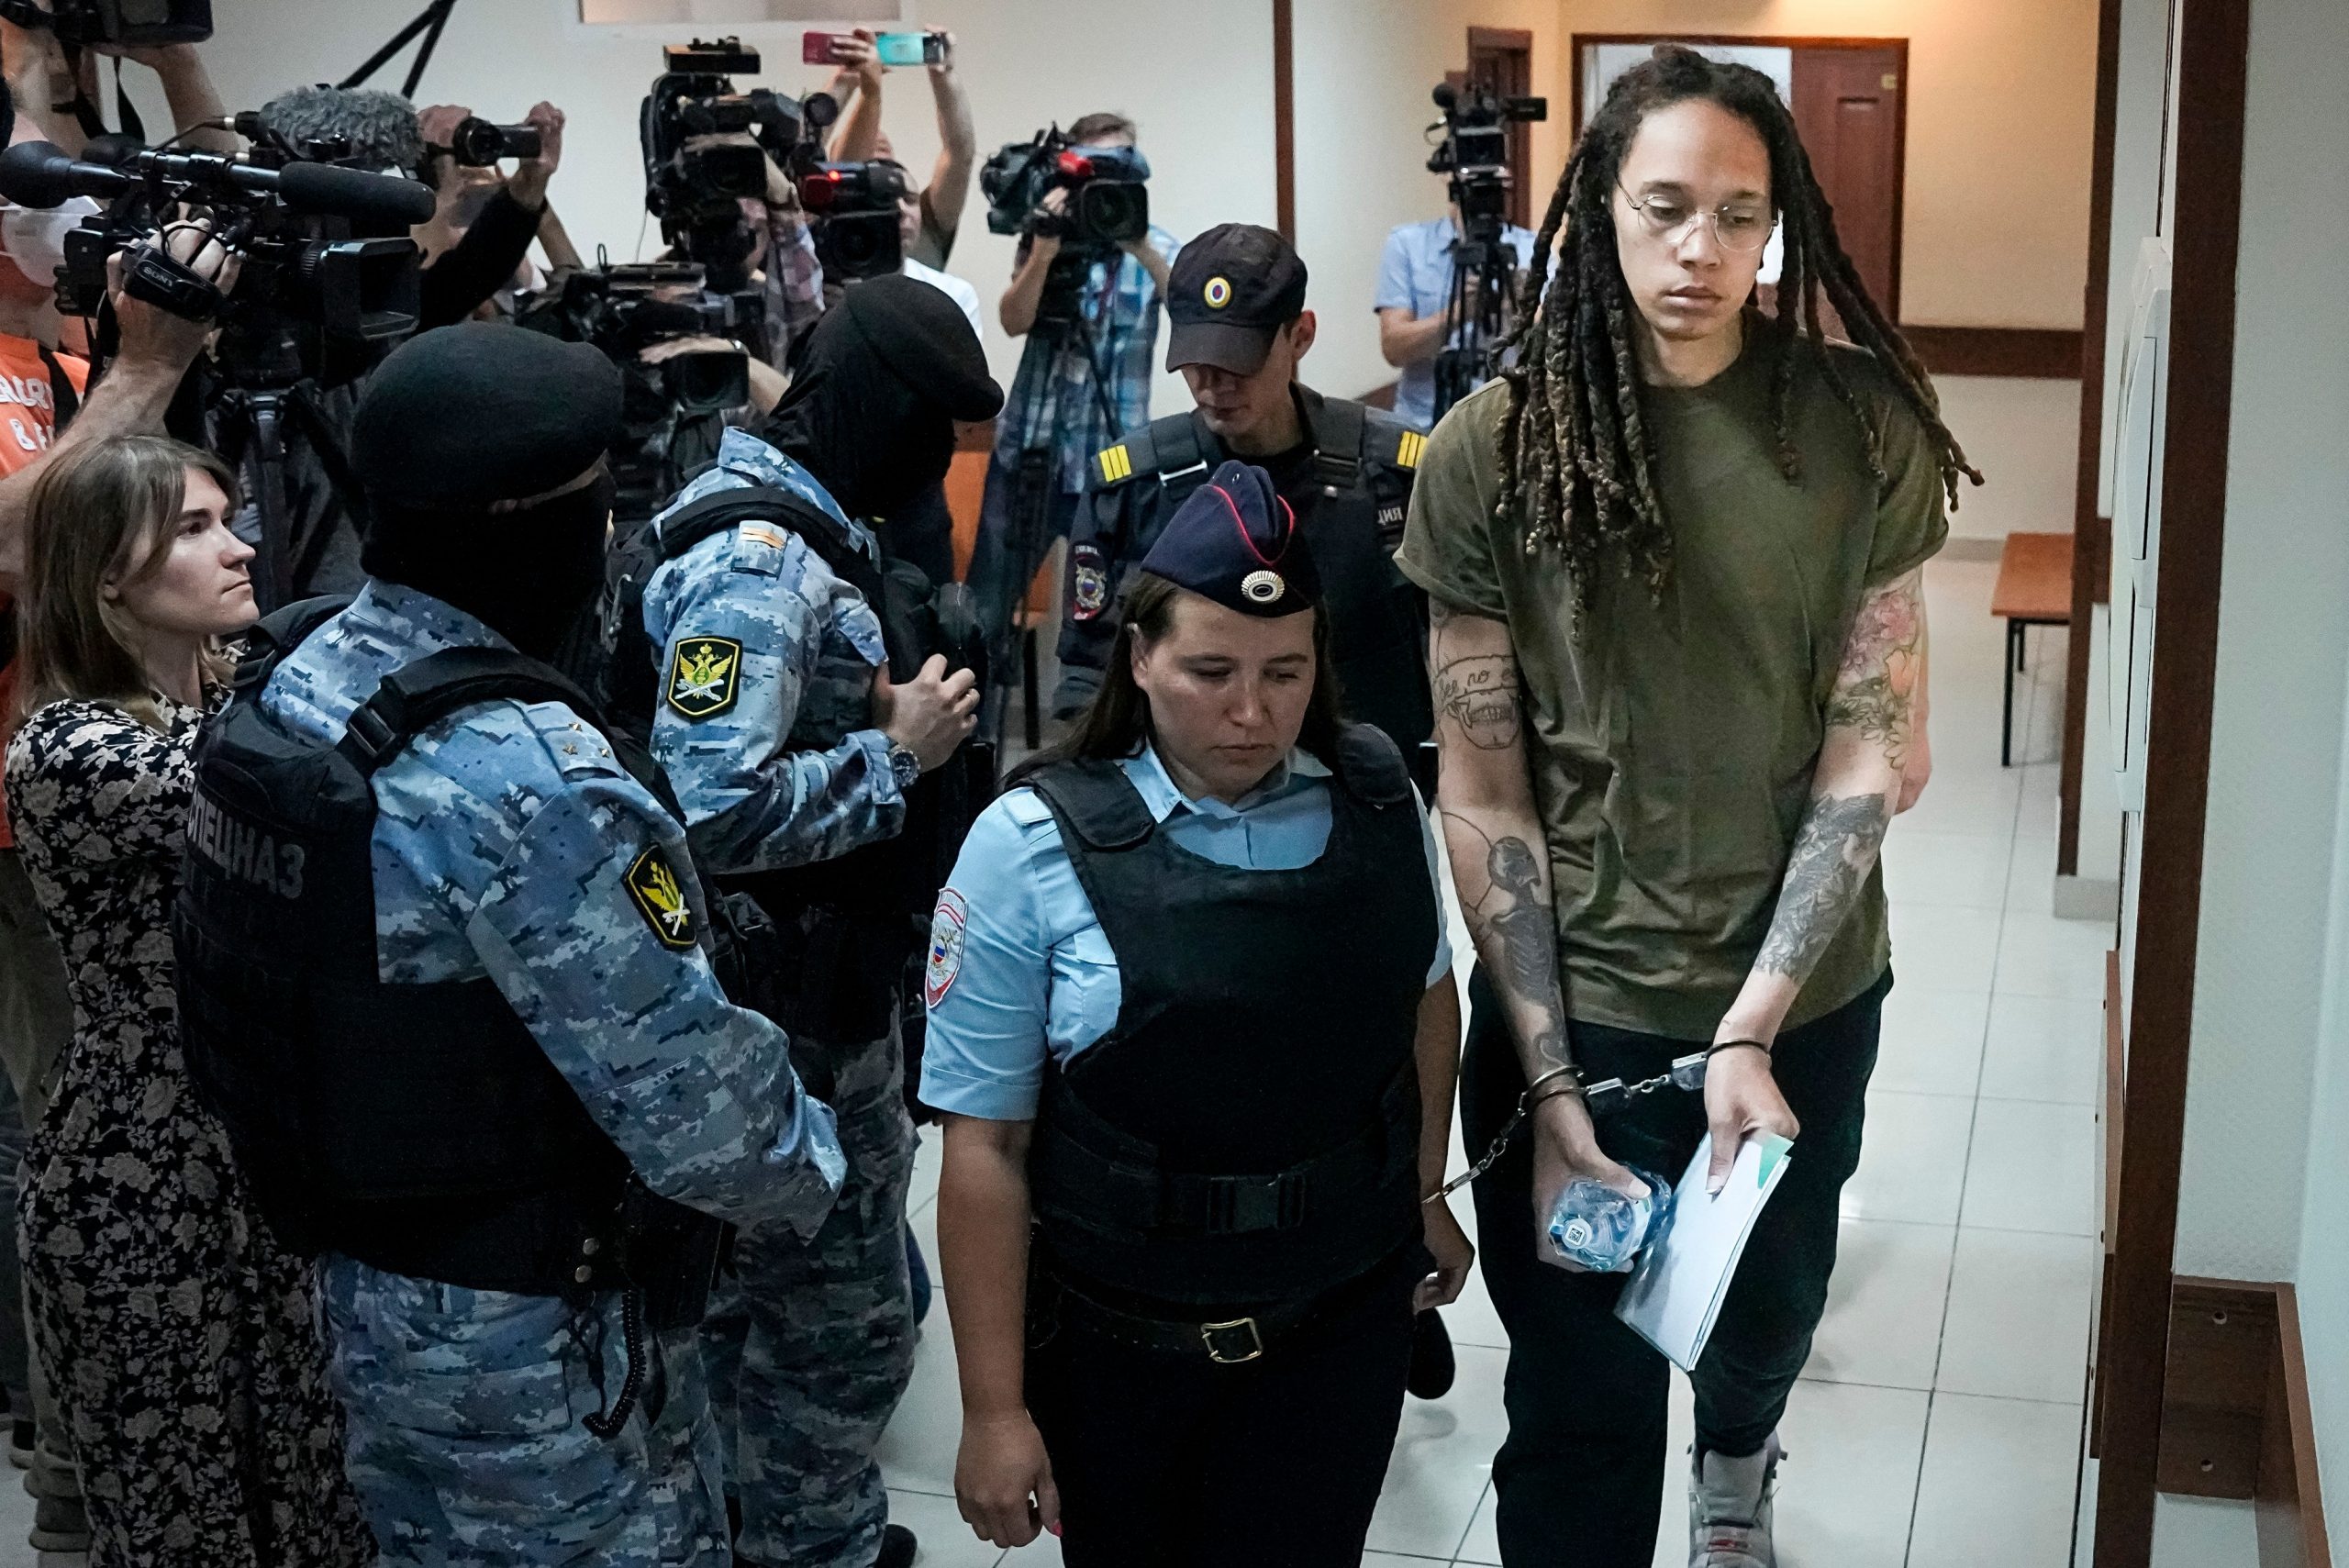 WNBA’s Brittney Griner convicted at drug trial, sentenced to 9 years